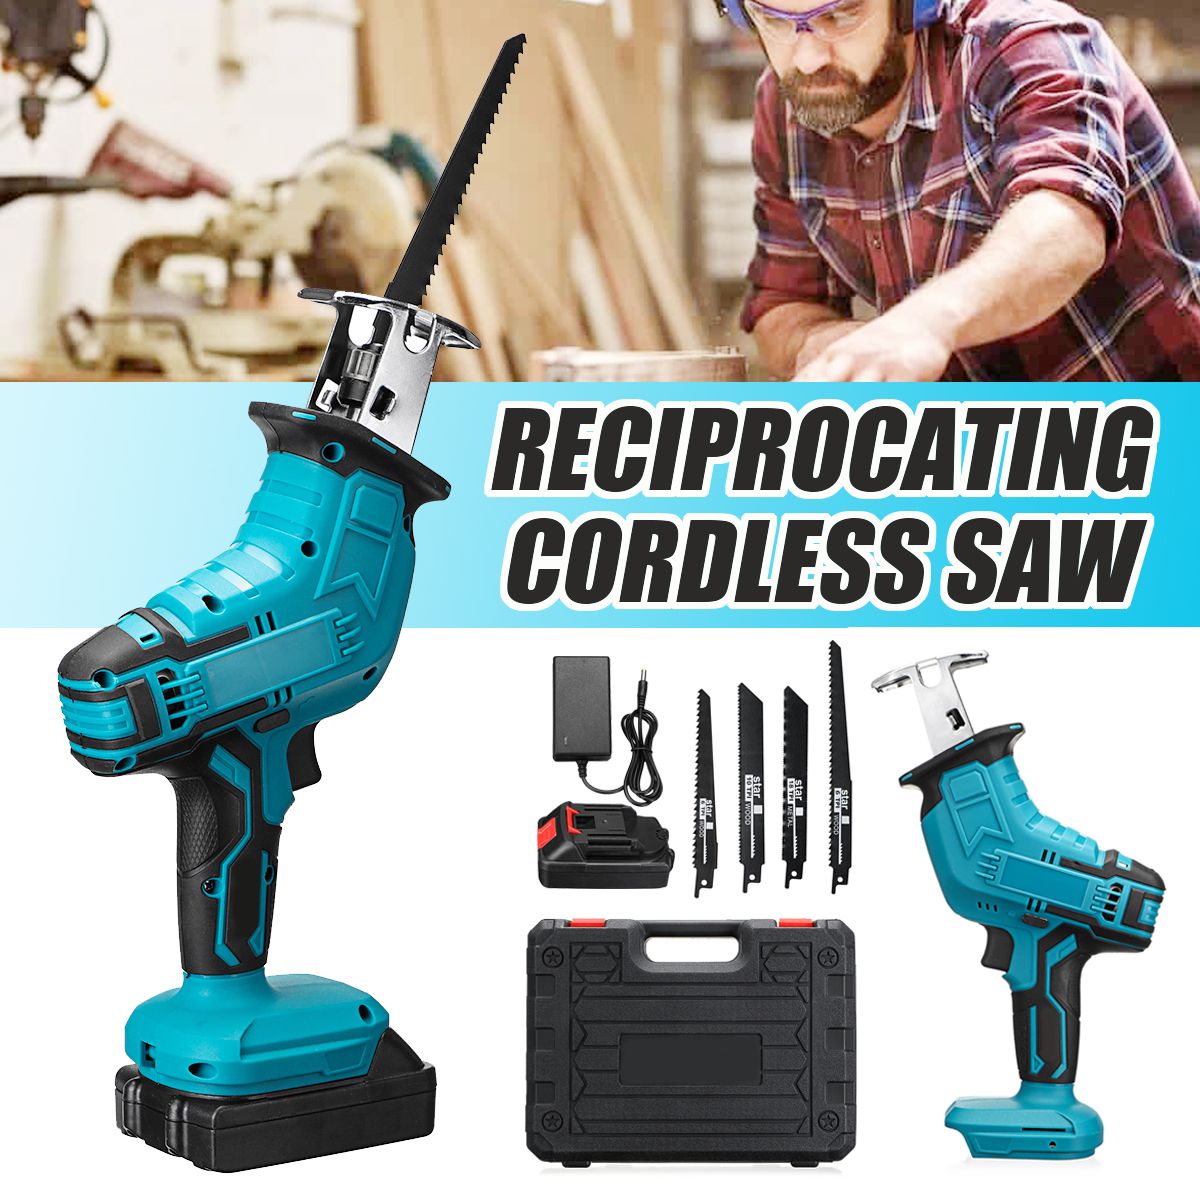 21V-Cordless-Reciprocating-Saw-Electric-Sabre-Saw-Woodworking-Wood-Metal-Cutting-Tool-1762480